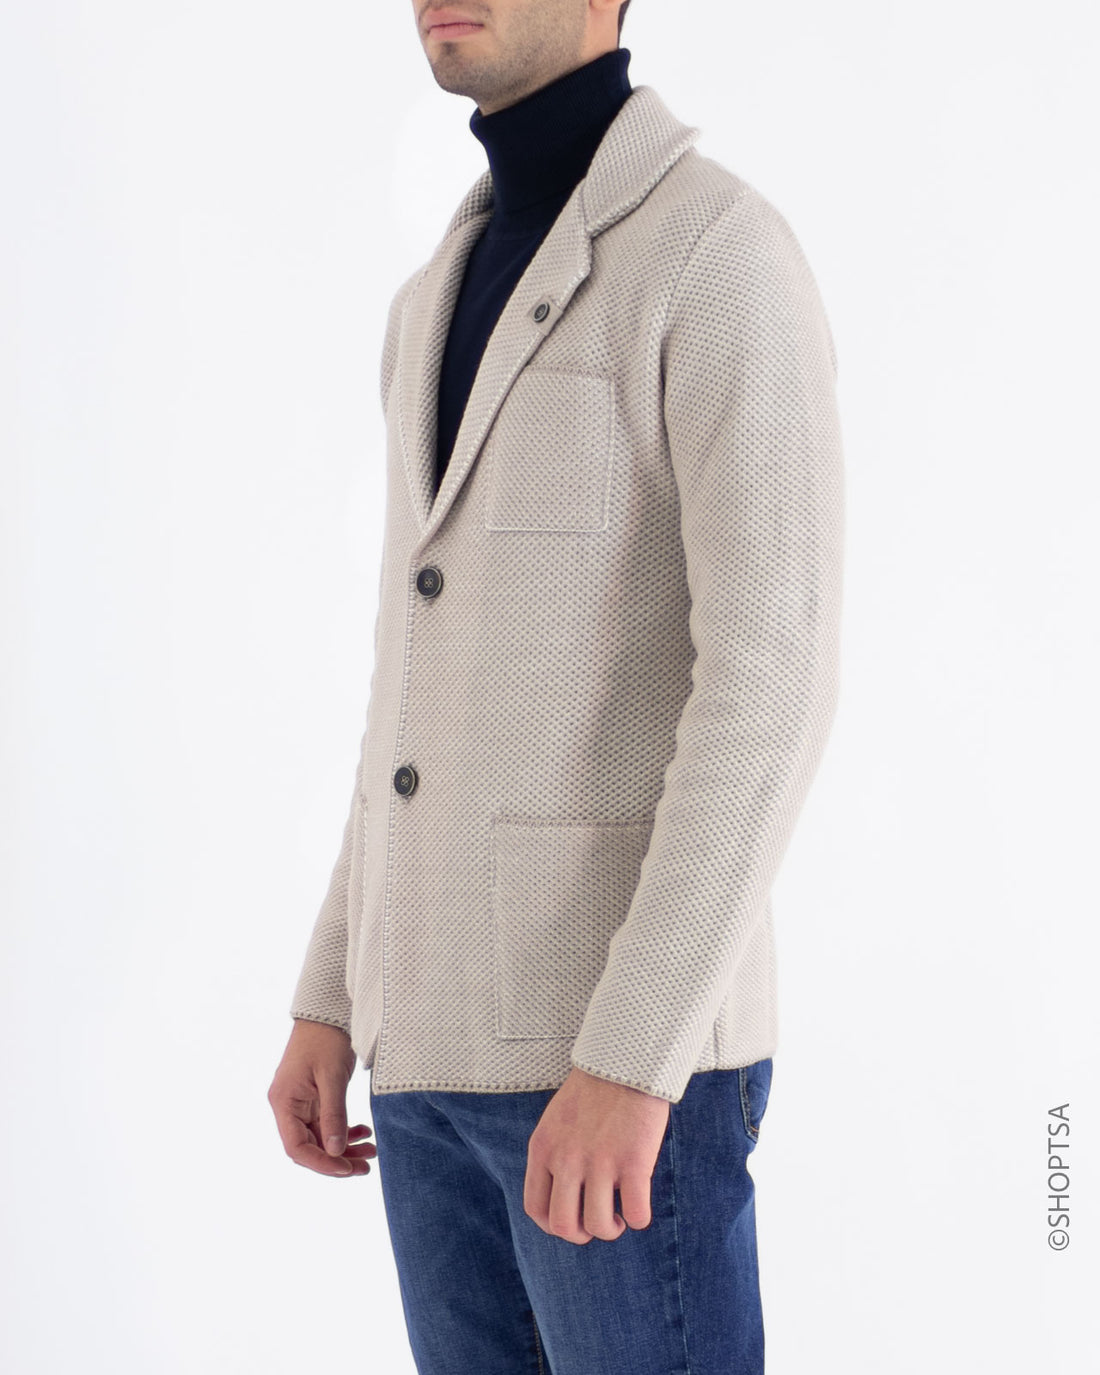 Knitted jacket - Cliver Jeans